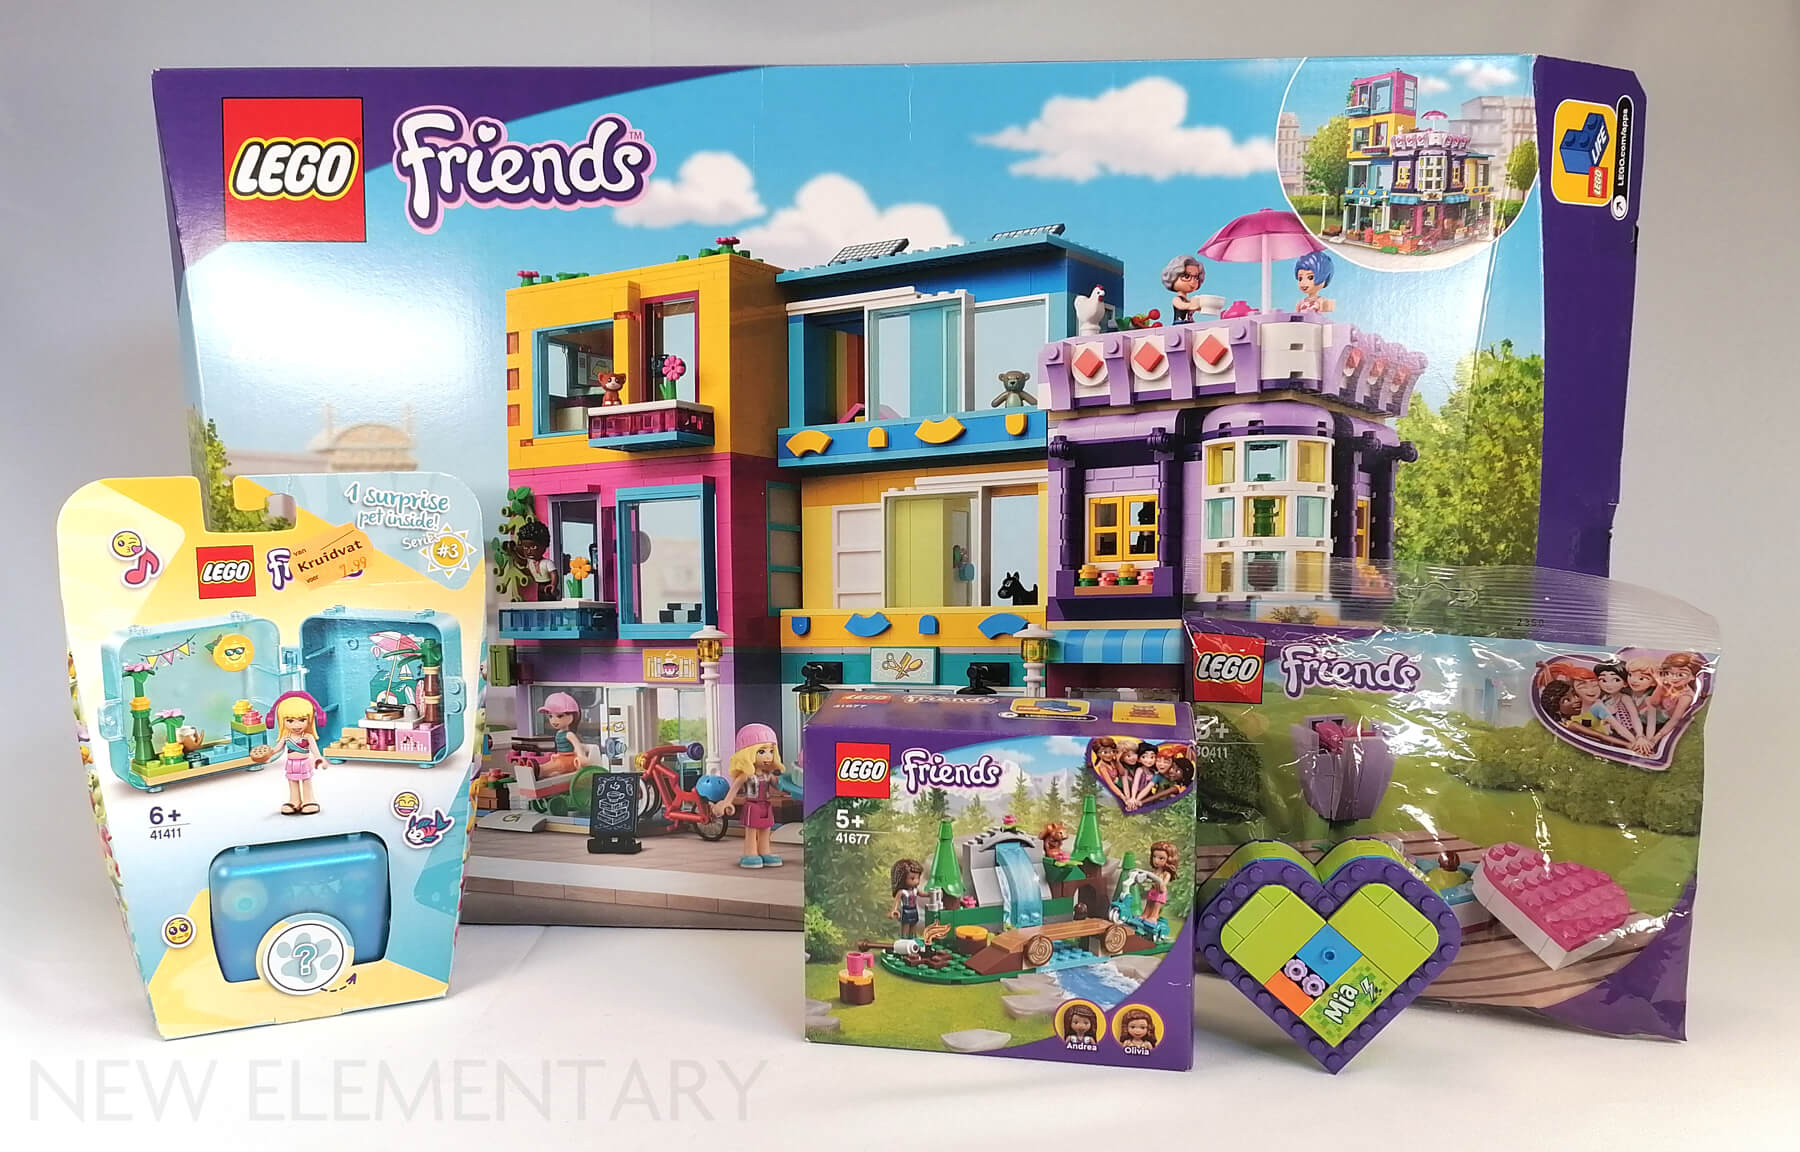 sværd etisk Særlig Old Elementary: 10 years of LEGO® Friends | New Elementary: LEGO® parts,  sets and techniques